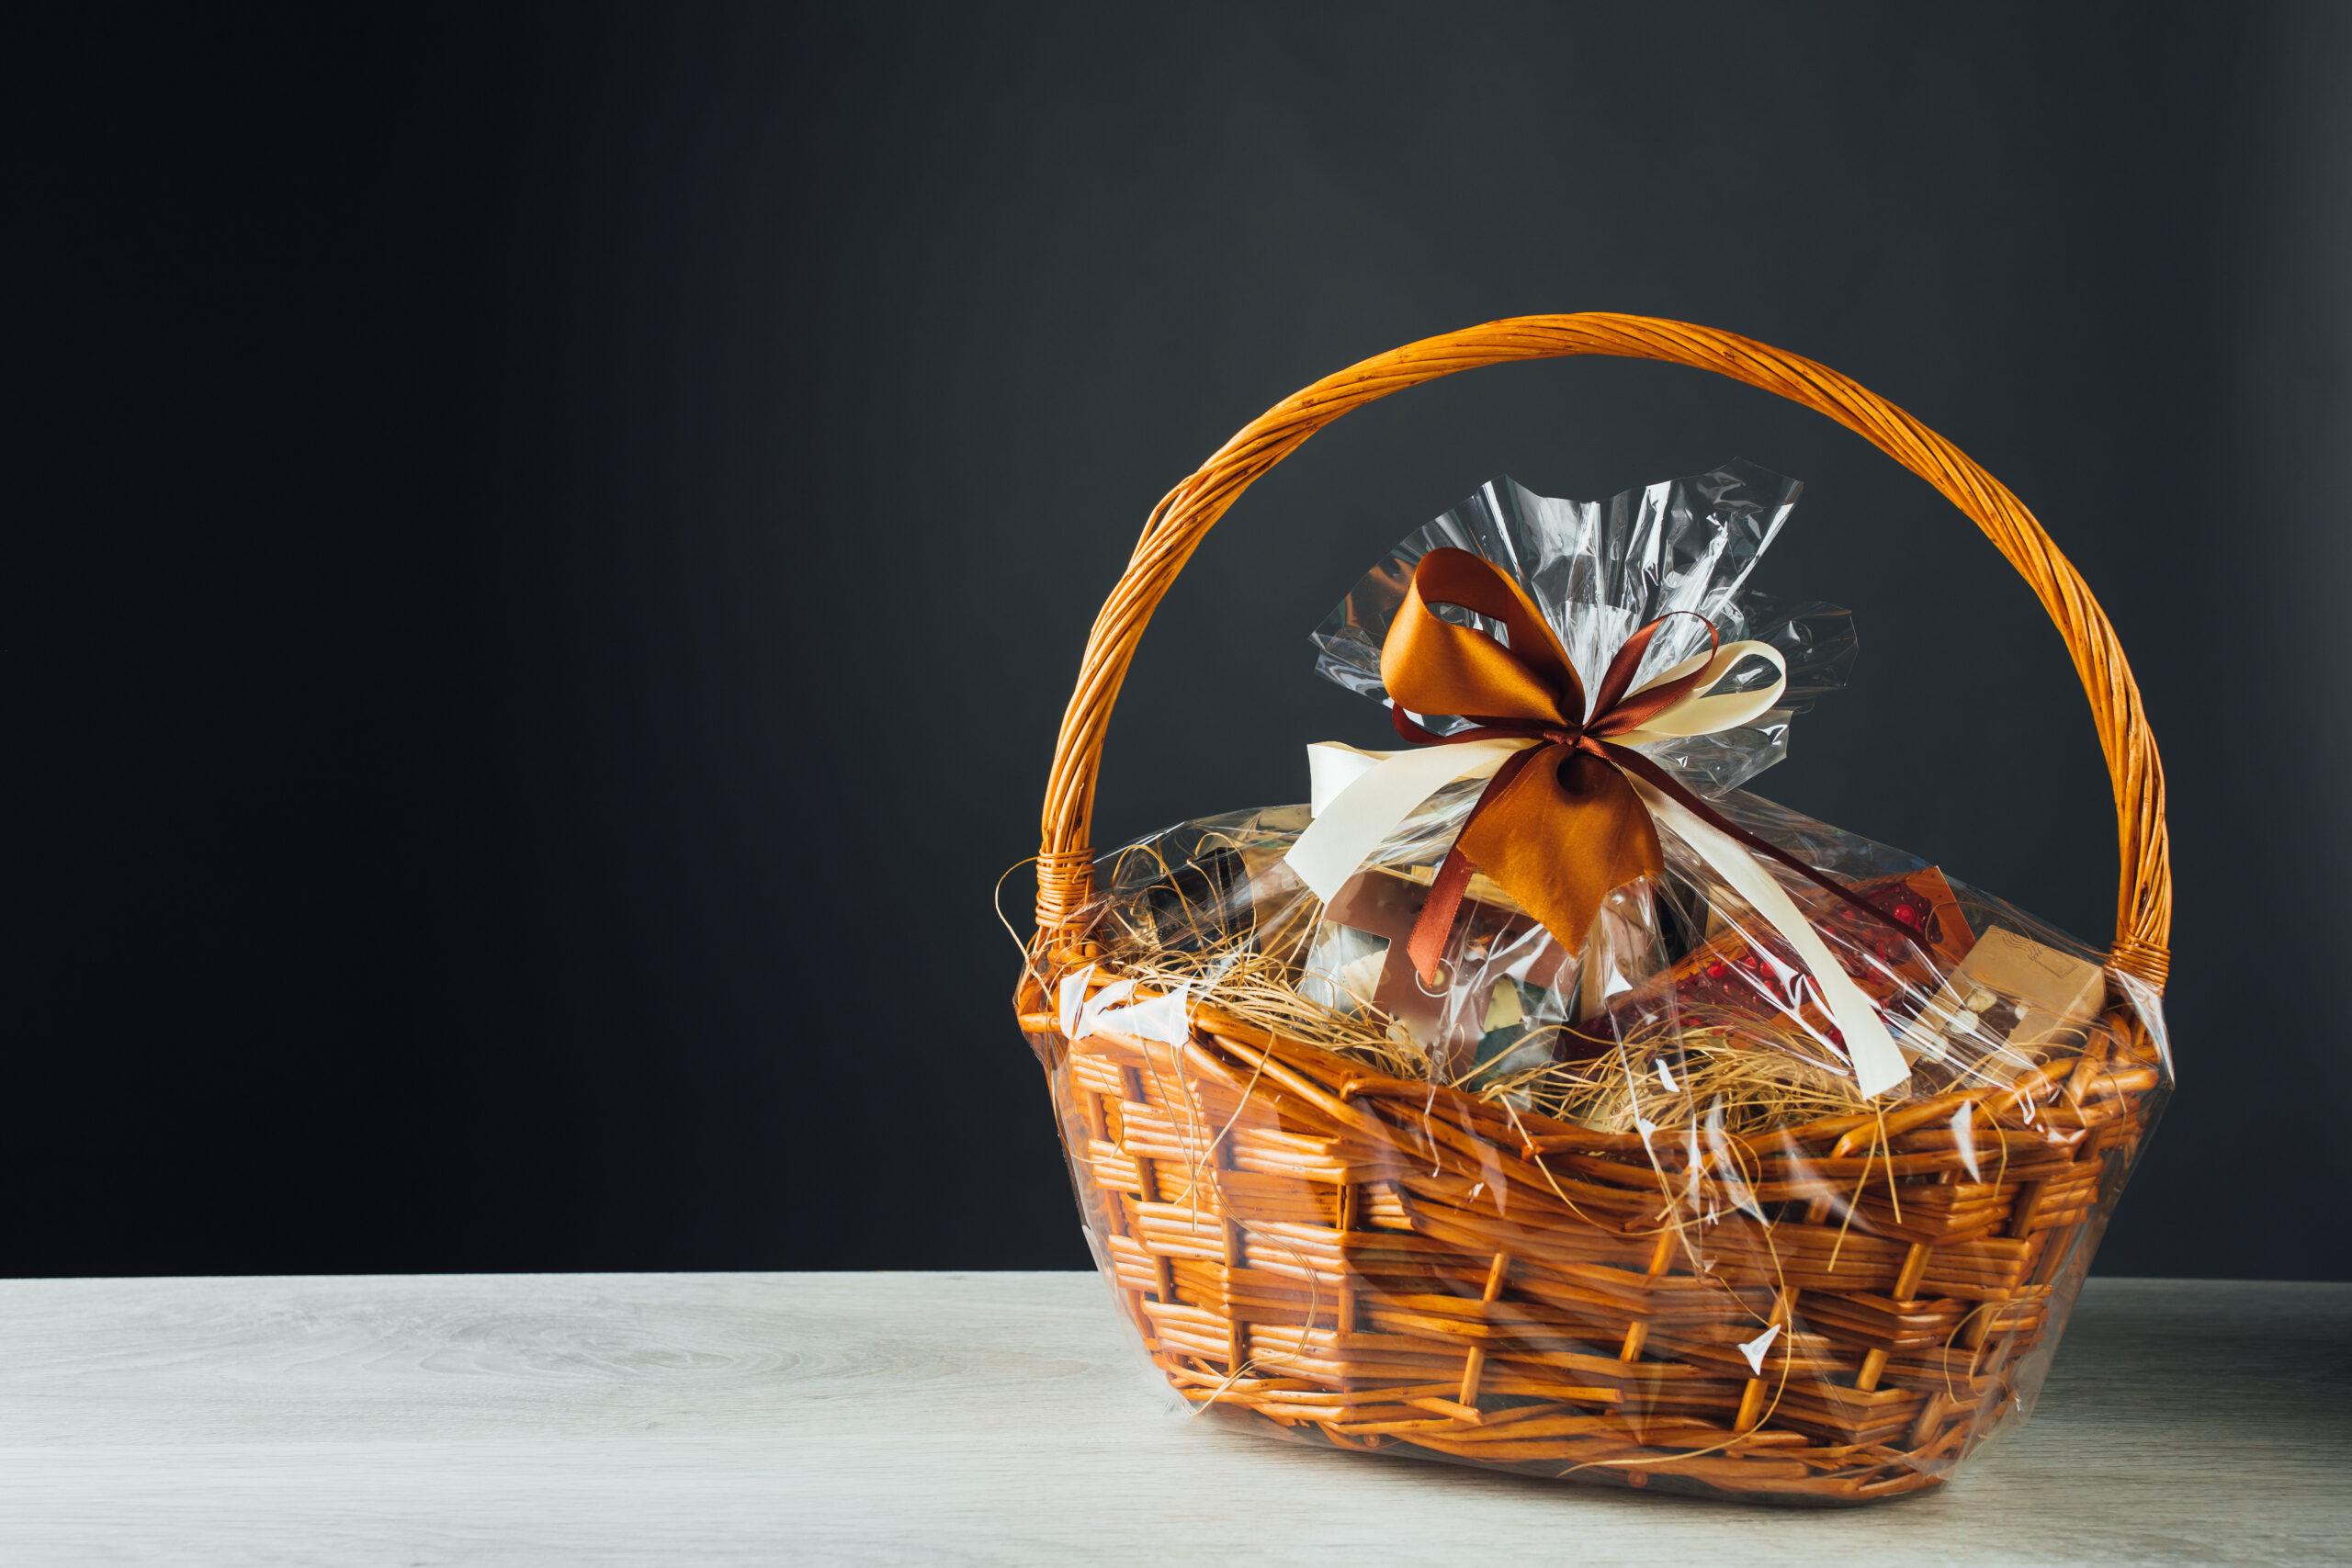 Enter to win a Holiday Kitchen Gift Basket!